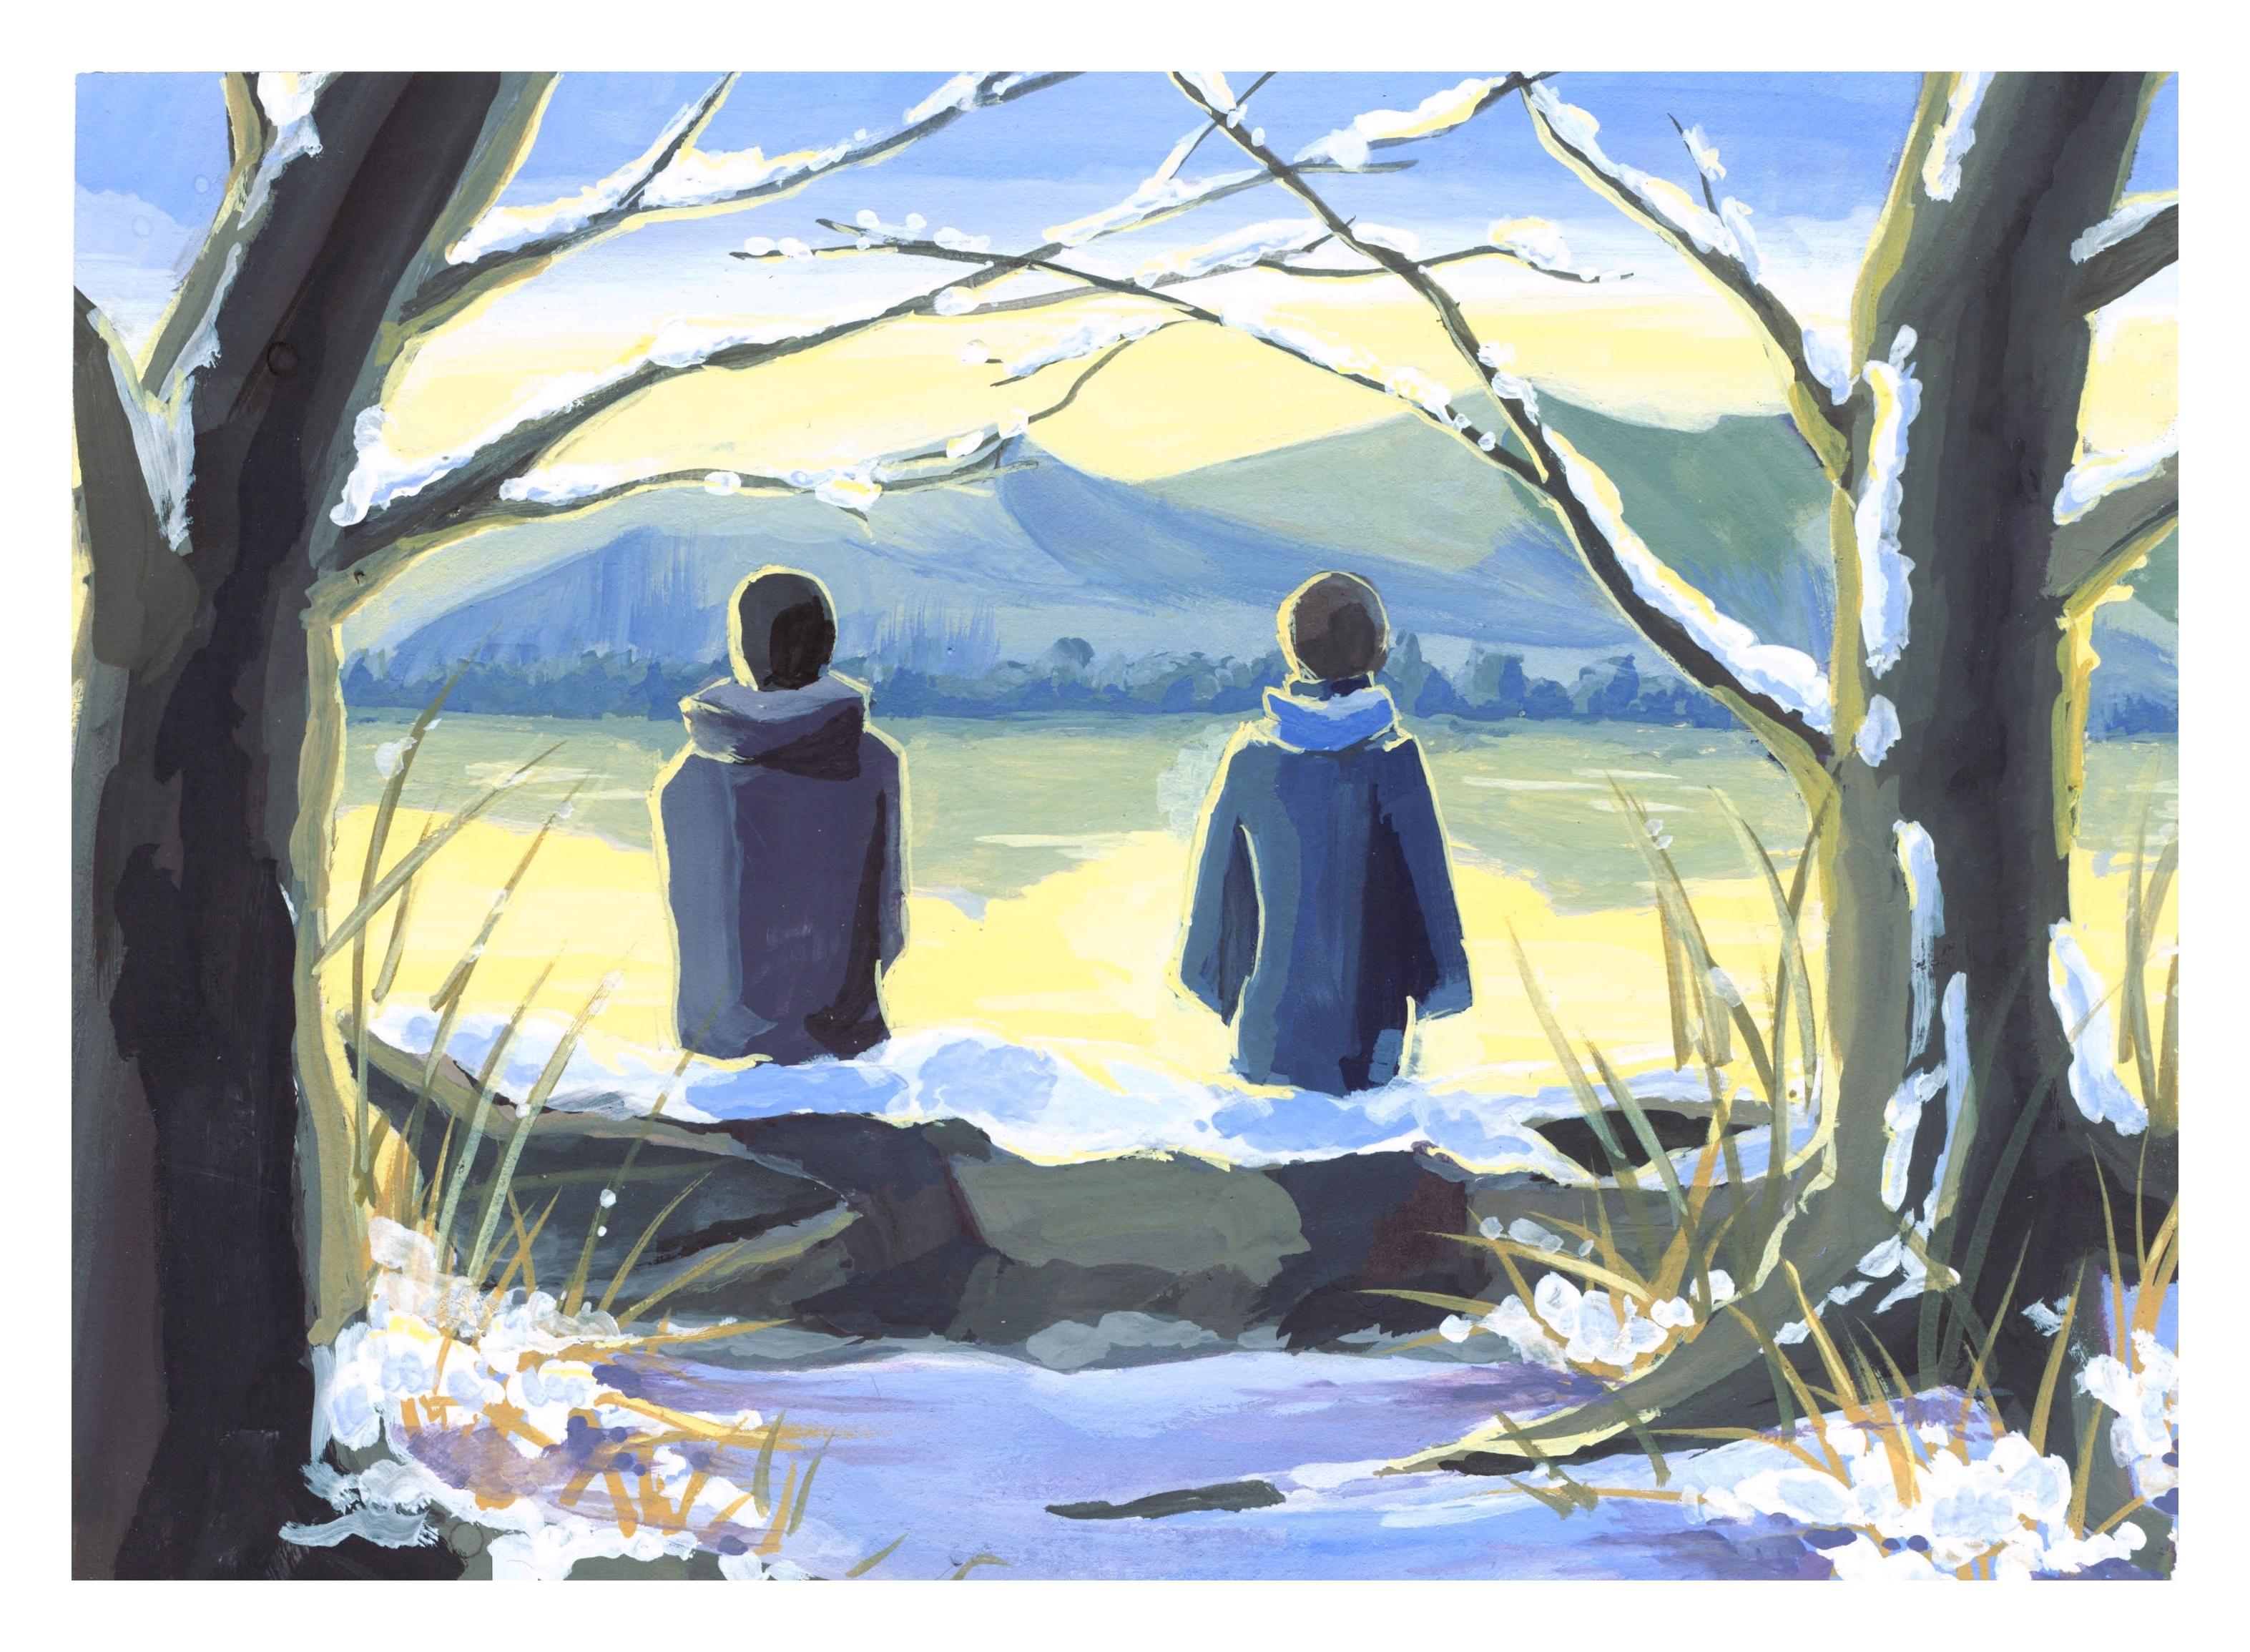 Gouache painting of Erika and Sebastian sitting on a fallen tree by the
lake. The sky is awash wtih warm yellow light, soft blue. Snow covers most surfaces.